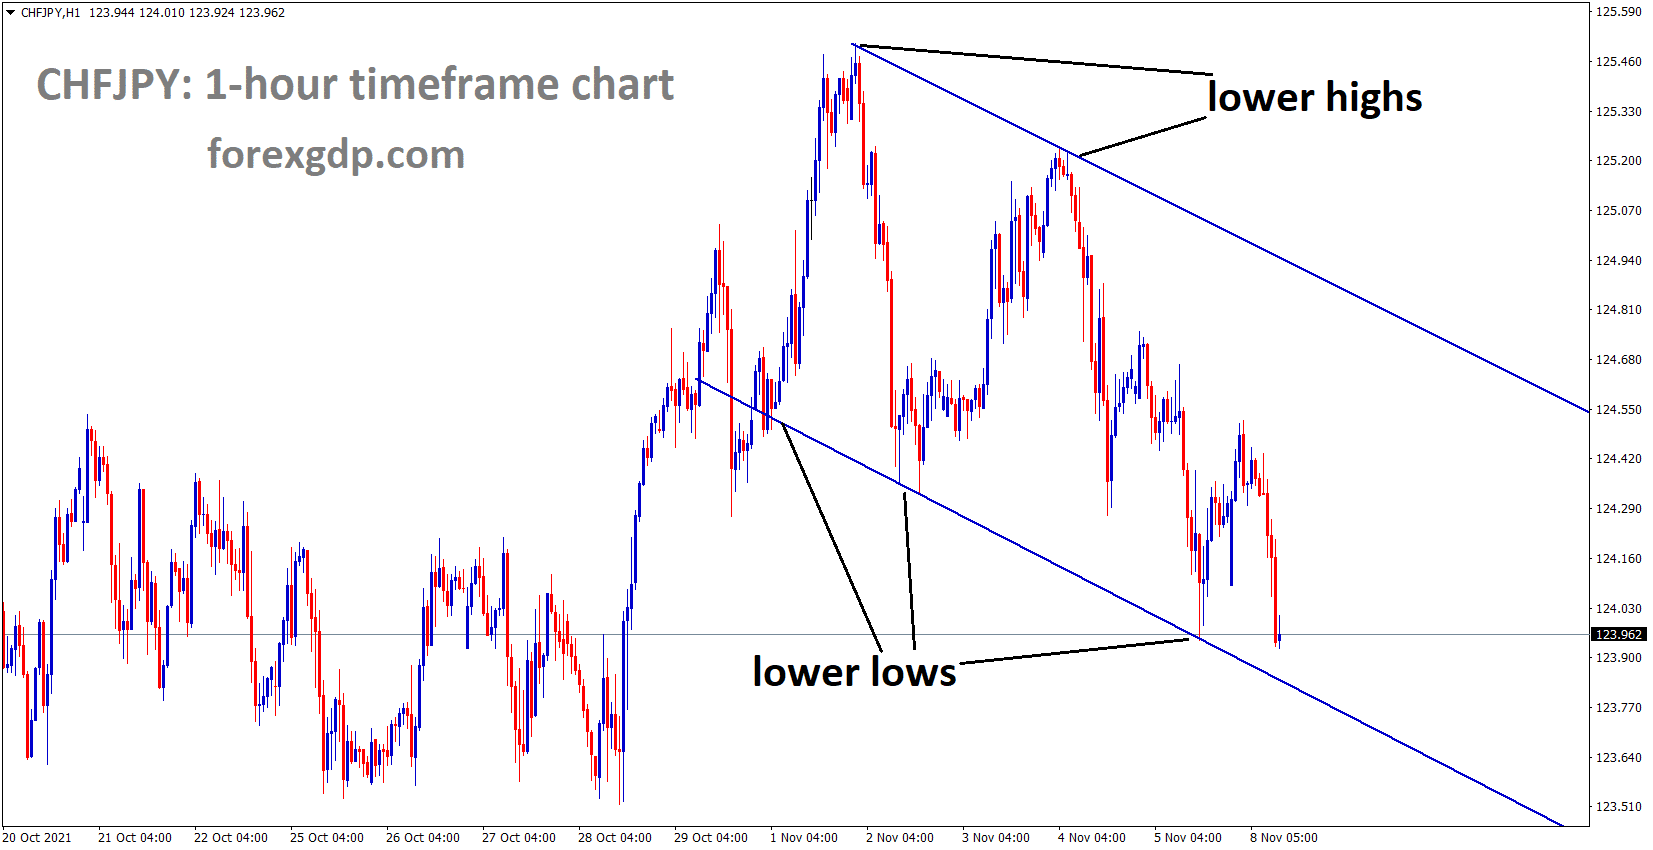 CHFJPY is moving in the Descending channel and fell from lower high area